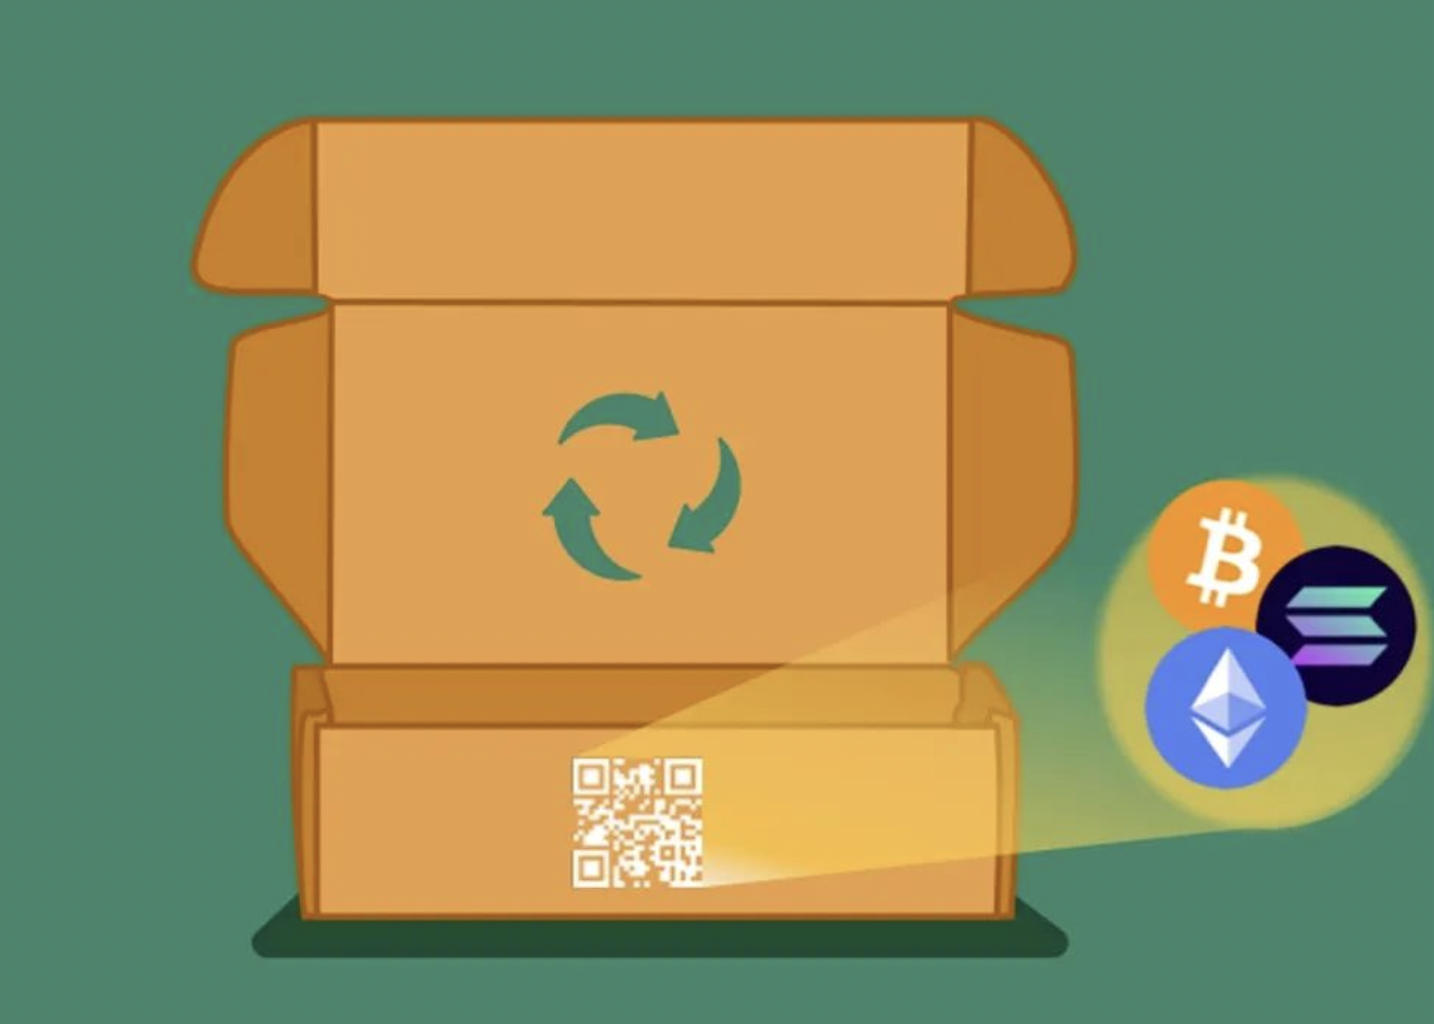 open cardboard packaging box with a QR code on the front and a recycling symbol on the lid